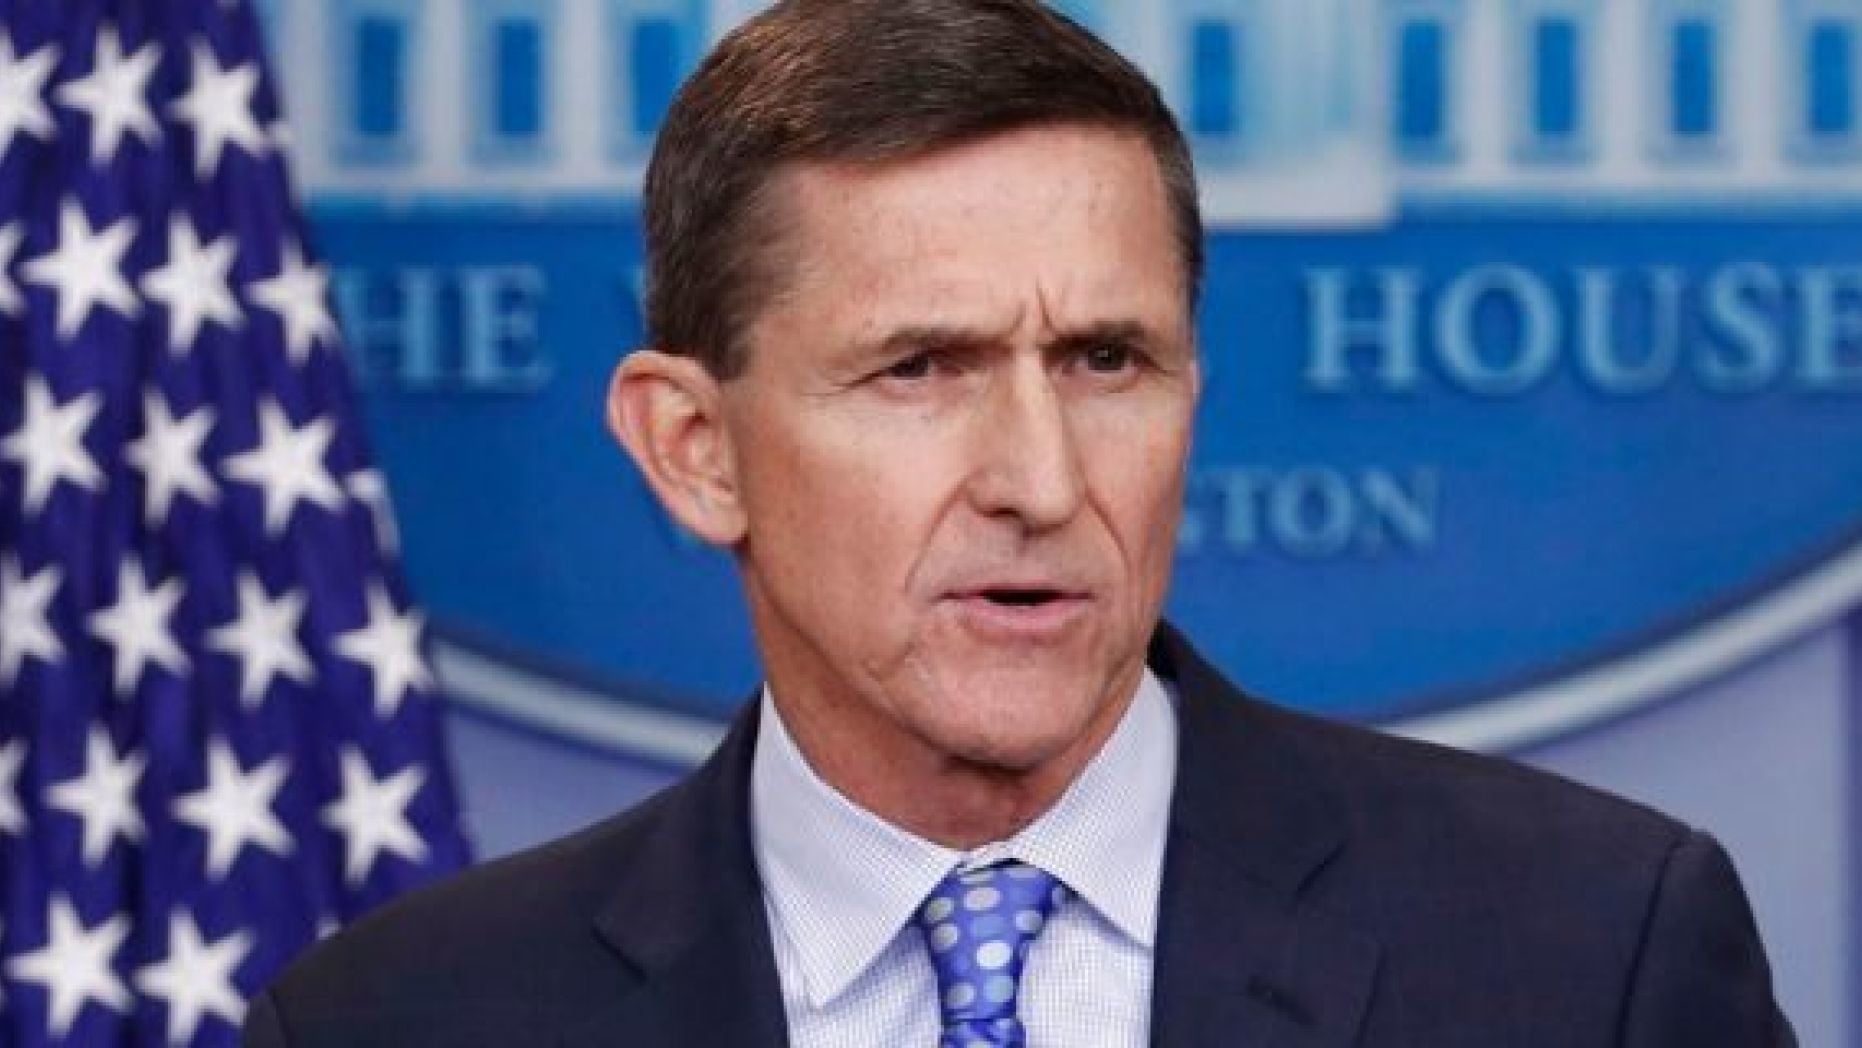 Flynn's Former Lawyers Covington And Burling Turn Over Another Trove Of Docs, Again - Sara A. Carter